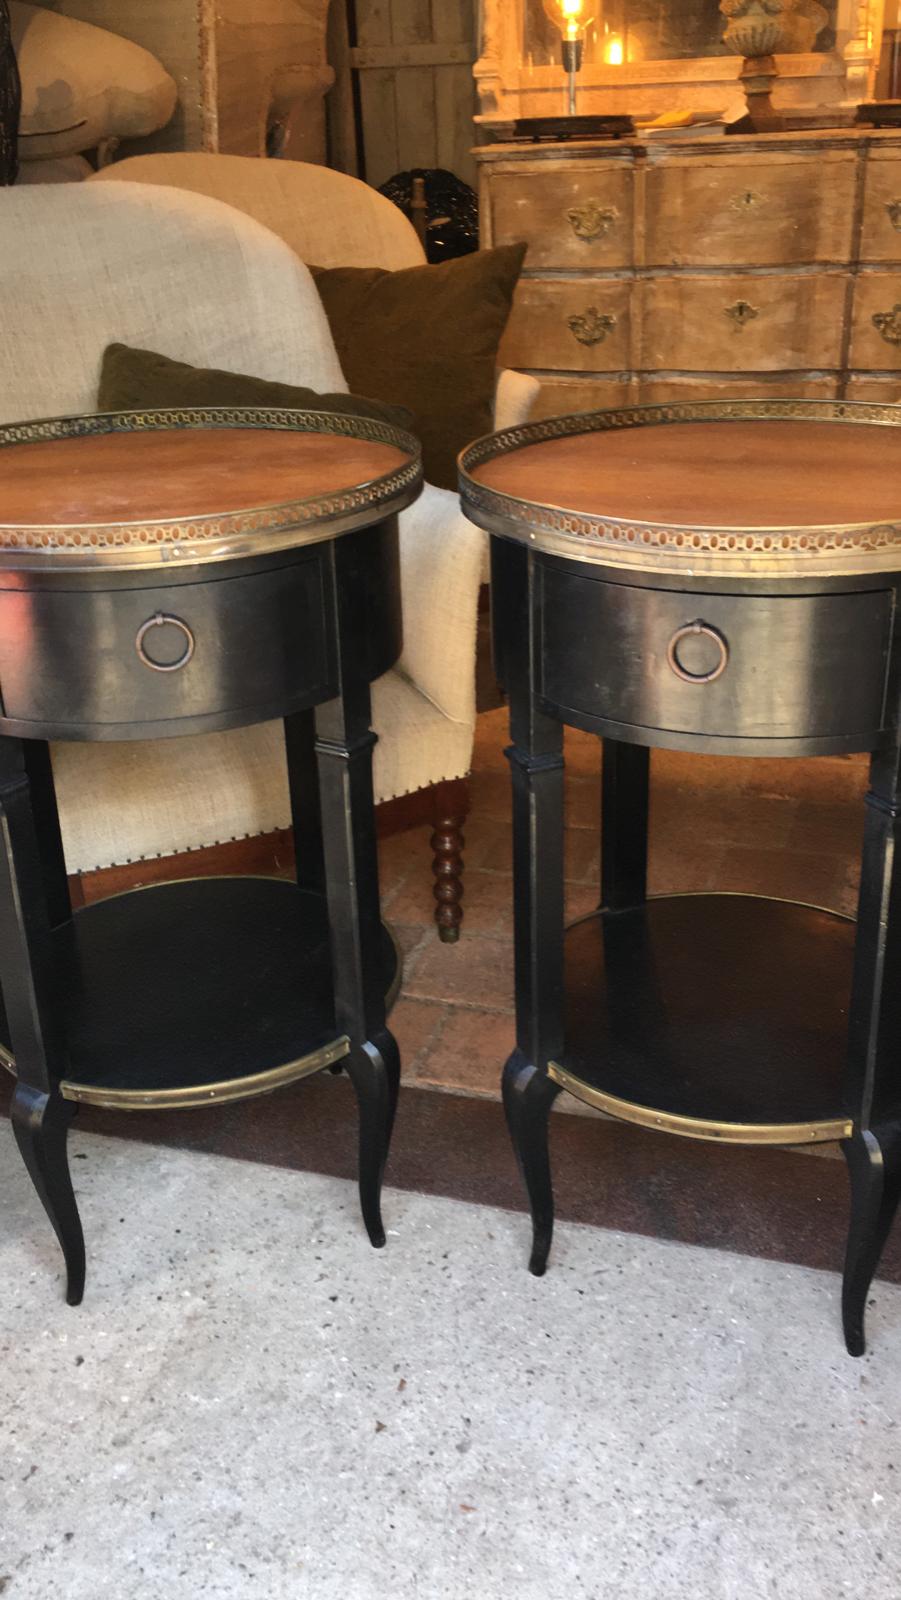 Black side table with brass details